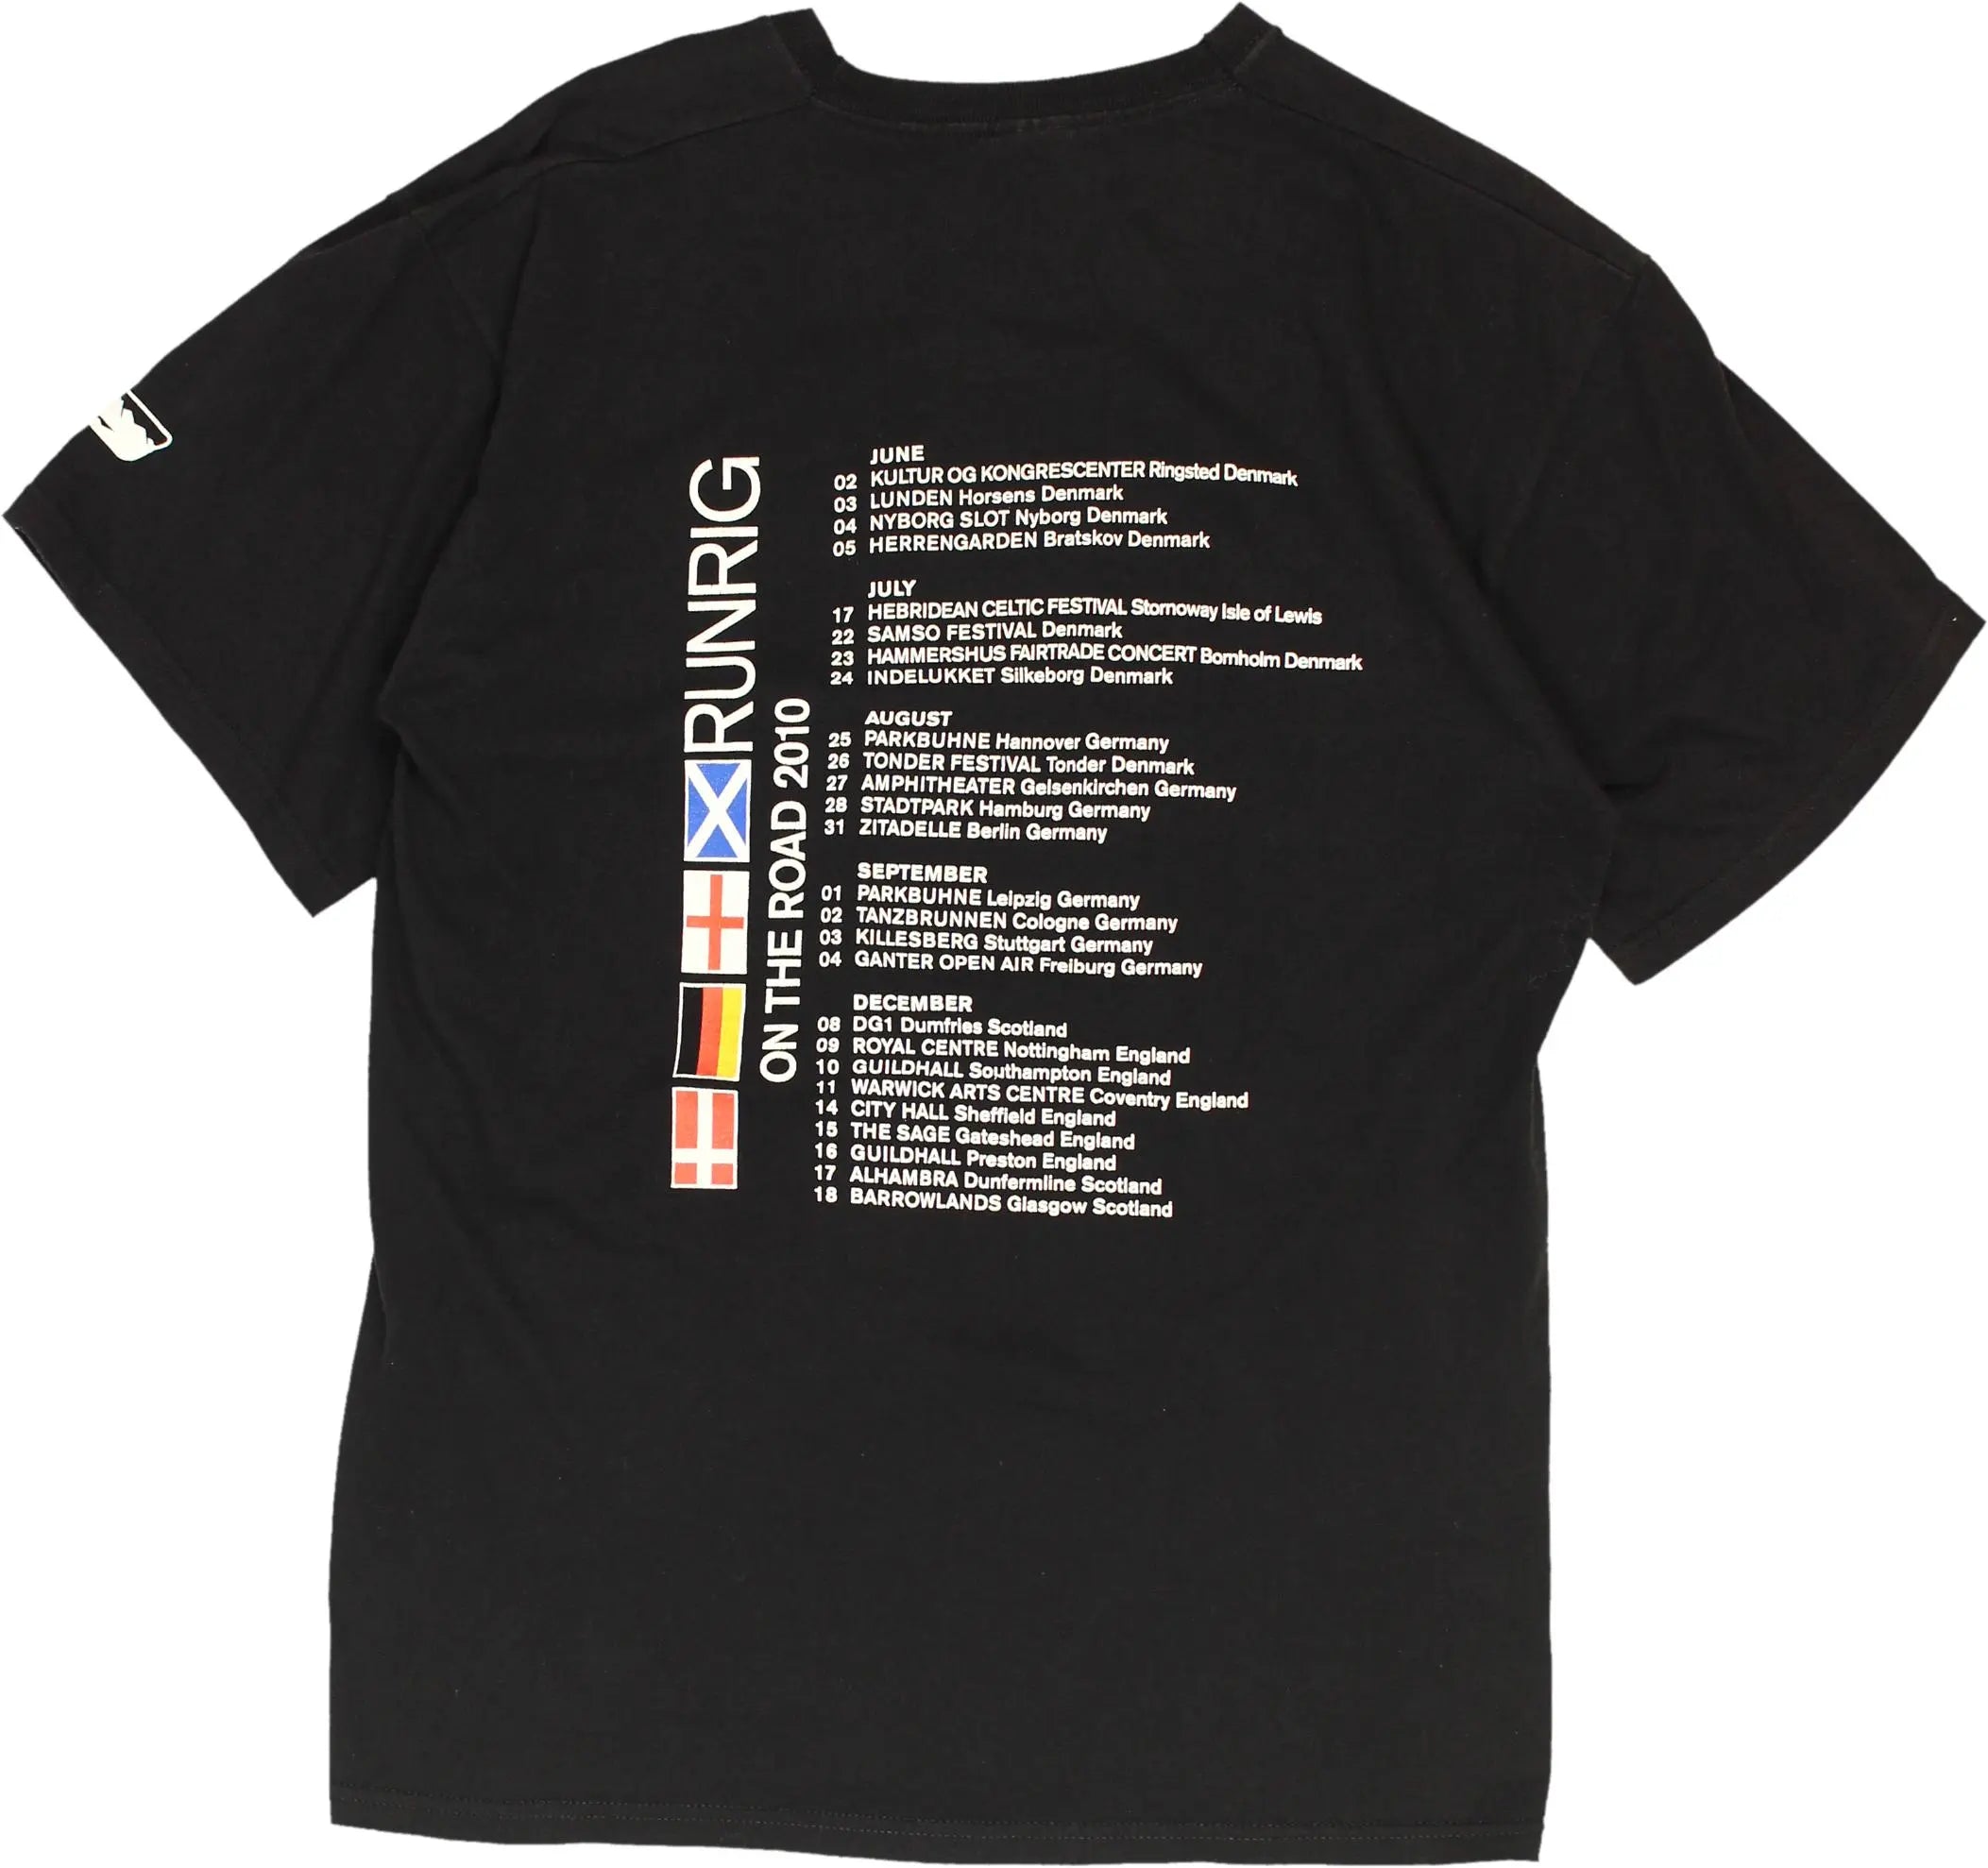 Fruit of the Loom - Runrig T-shirt- ThriftTale.com - Vintage and second handclothing